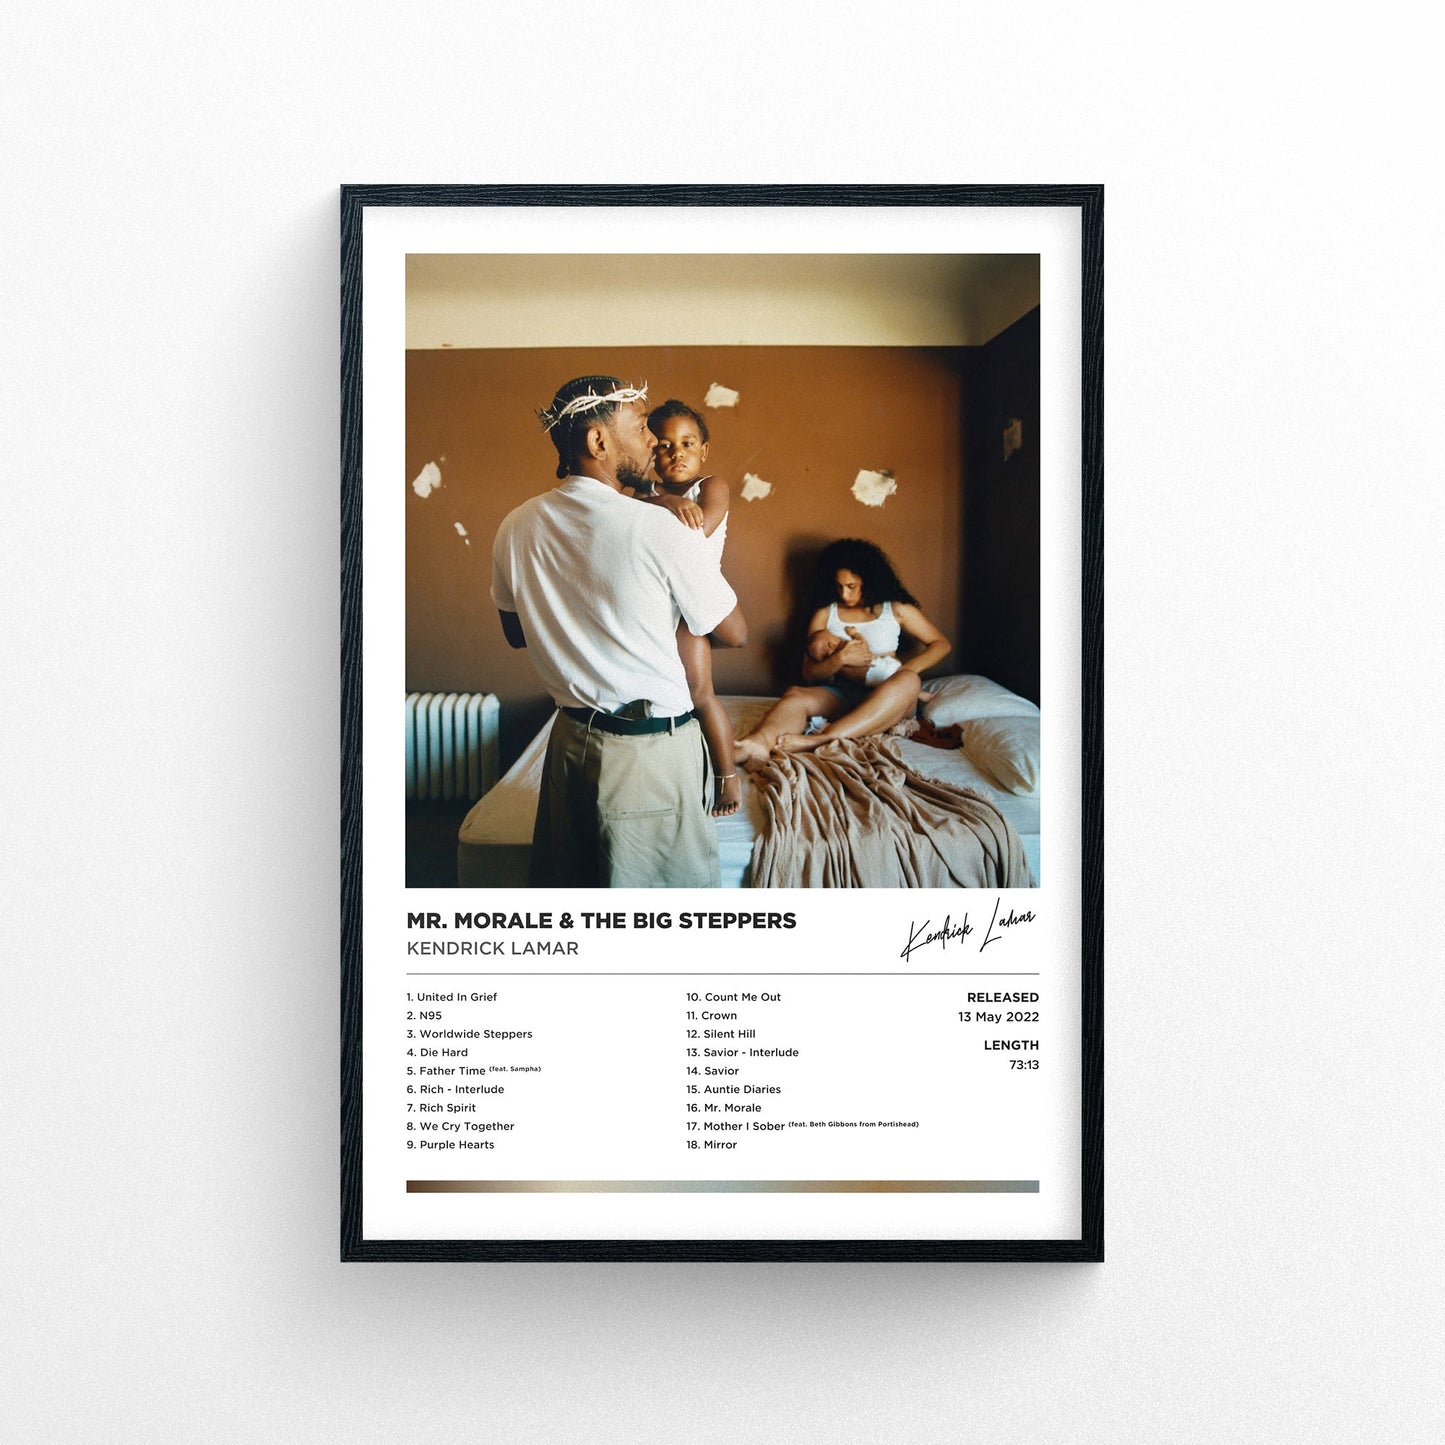 Kendrick Lamar - Mr Morale and the Big Steppers Framed Poster Print | Polaroid Style | Album Cover Artwork